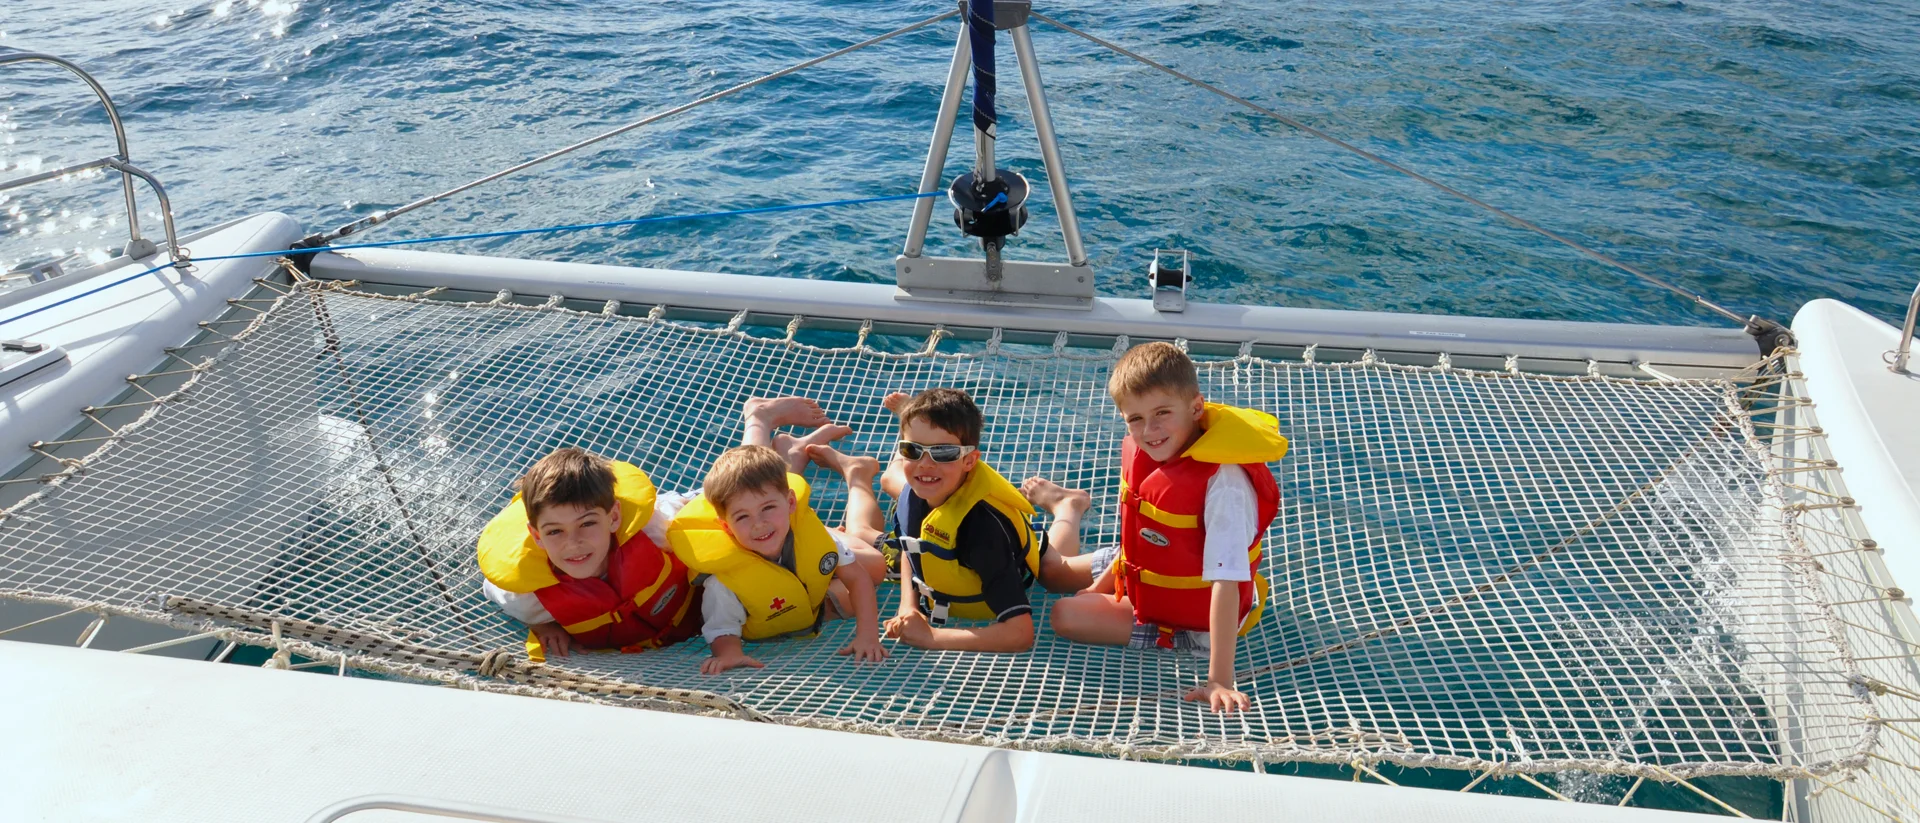 Children enjoying holiday in a catamaran with sunglasses and lifejackets